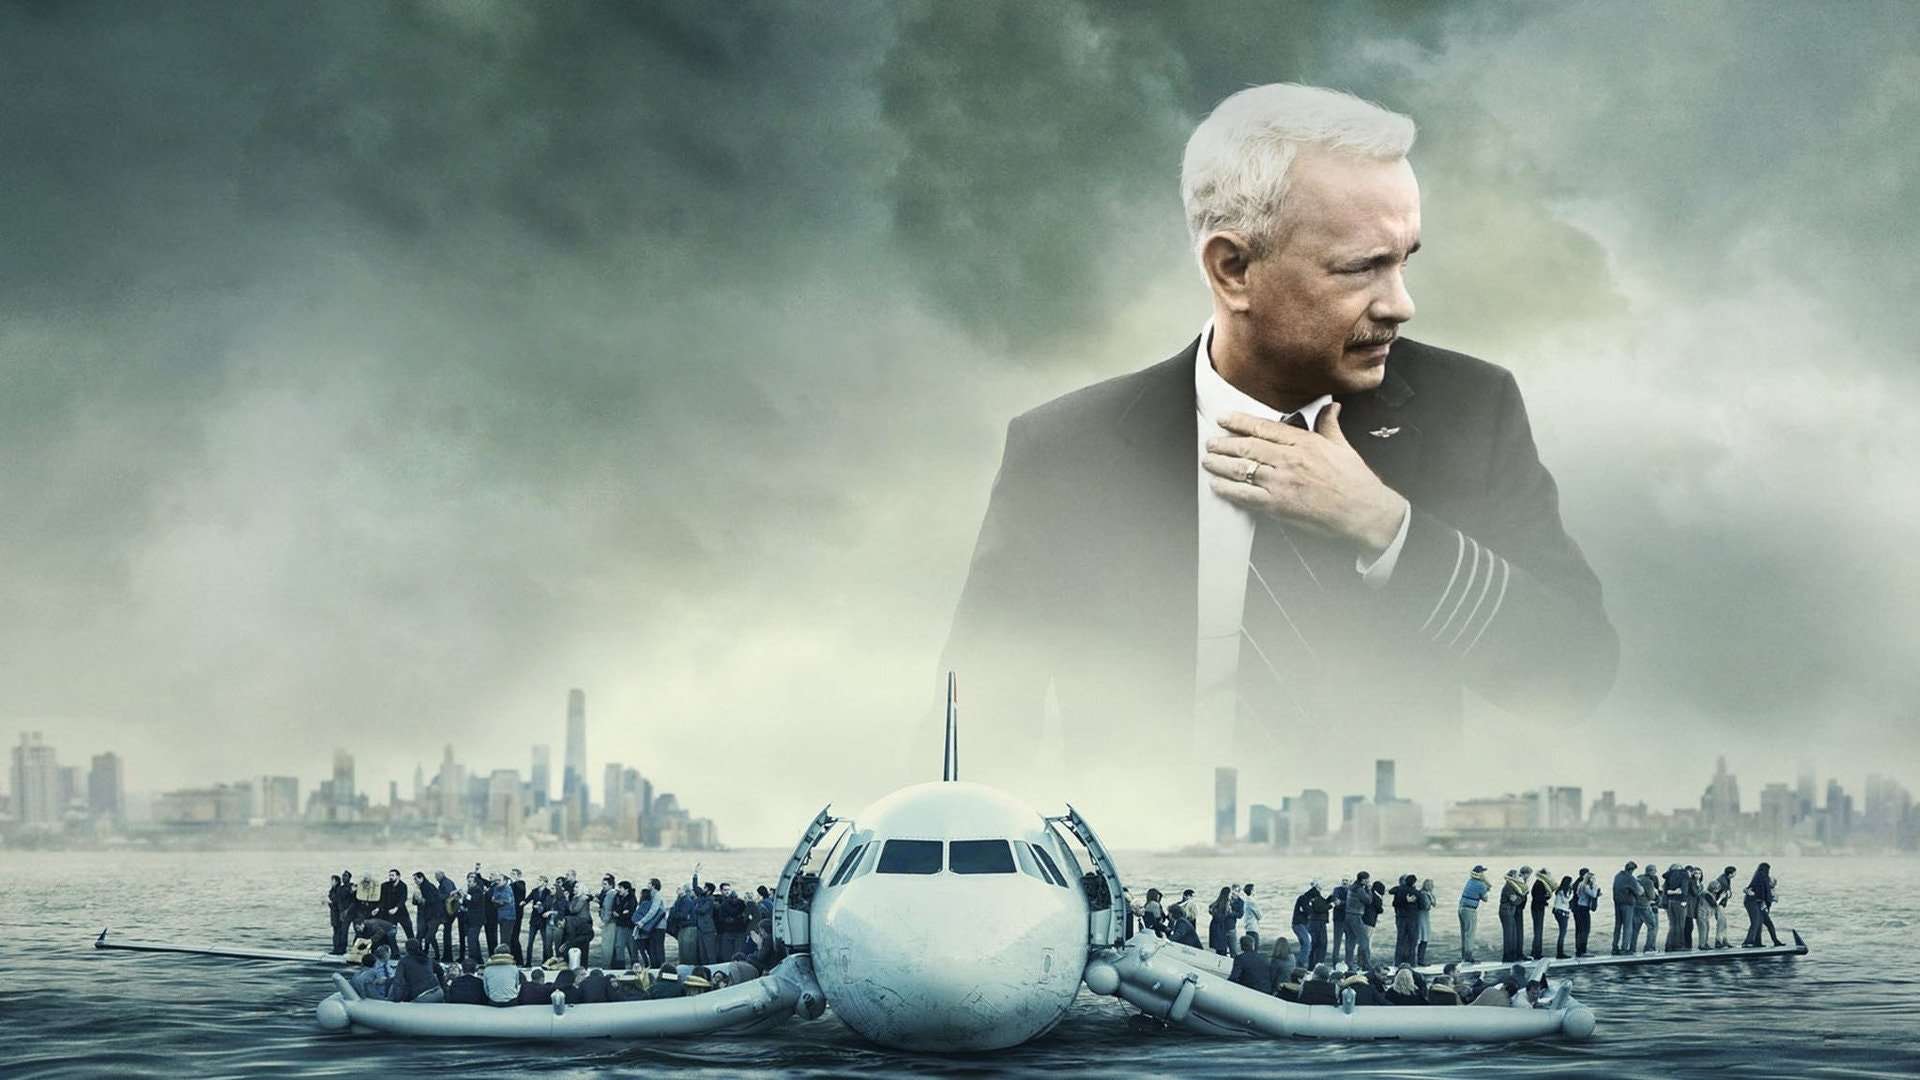 Directed by Clint Eastwood, Written by Todd Komarnicki, Based on "Highest Duty" by Chesley "Sully" Sullenberger, and Jeffrey Skiles, Produced by Clint Eastwood, Frank Marshall, Tim Moore, Allyn Stewart, and Steven Mnuchin, Starring: Tom Hanks, Aaron Eckhart, Laura Linney, with Cinematography by Tom Stern, and Edited by Blu Murray, with Music by Christian Jacob, and The Tierney Sutton Band, Production compa: Village Roadshow Pictures, Flashlight Films, The Kennedy/Marshall Company, Malpaso Productions, Orange Corp, and Distributed by Warner Bros. Pictures (2016)